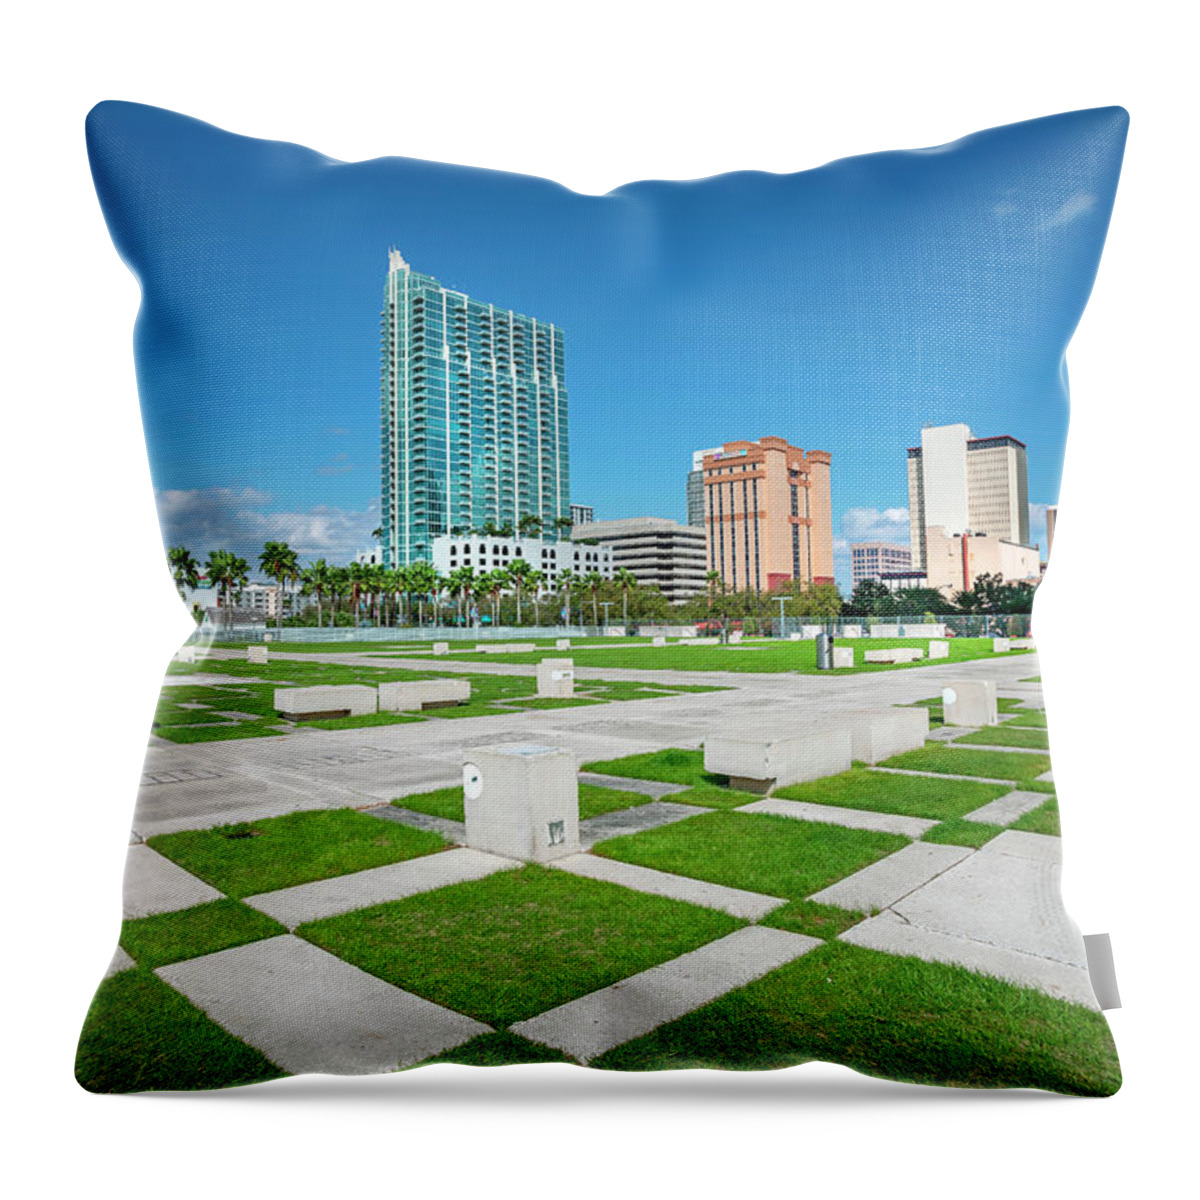 Estock Throw Pillow featuring the digital art Curtis Hixon Park In Tampa by Lumiere